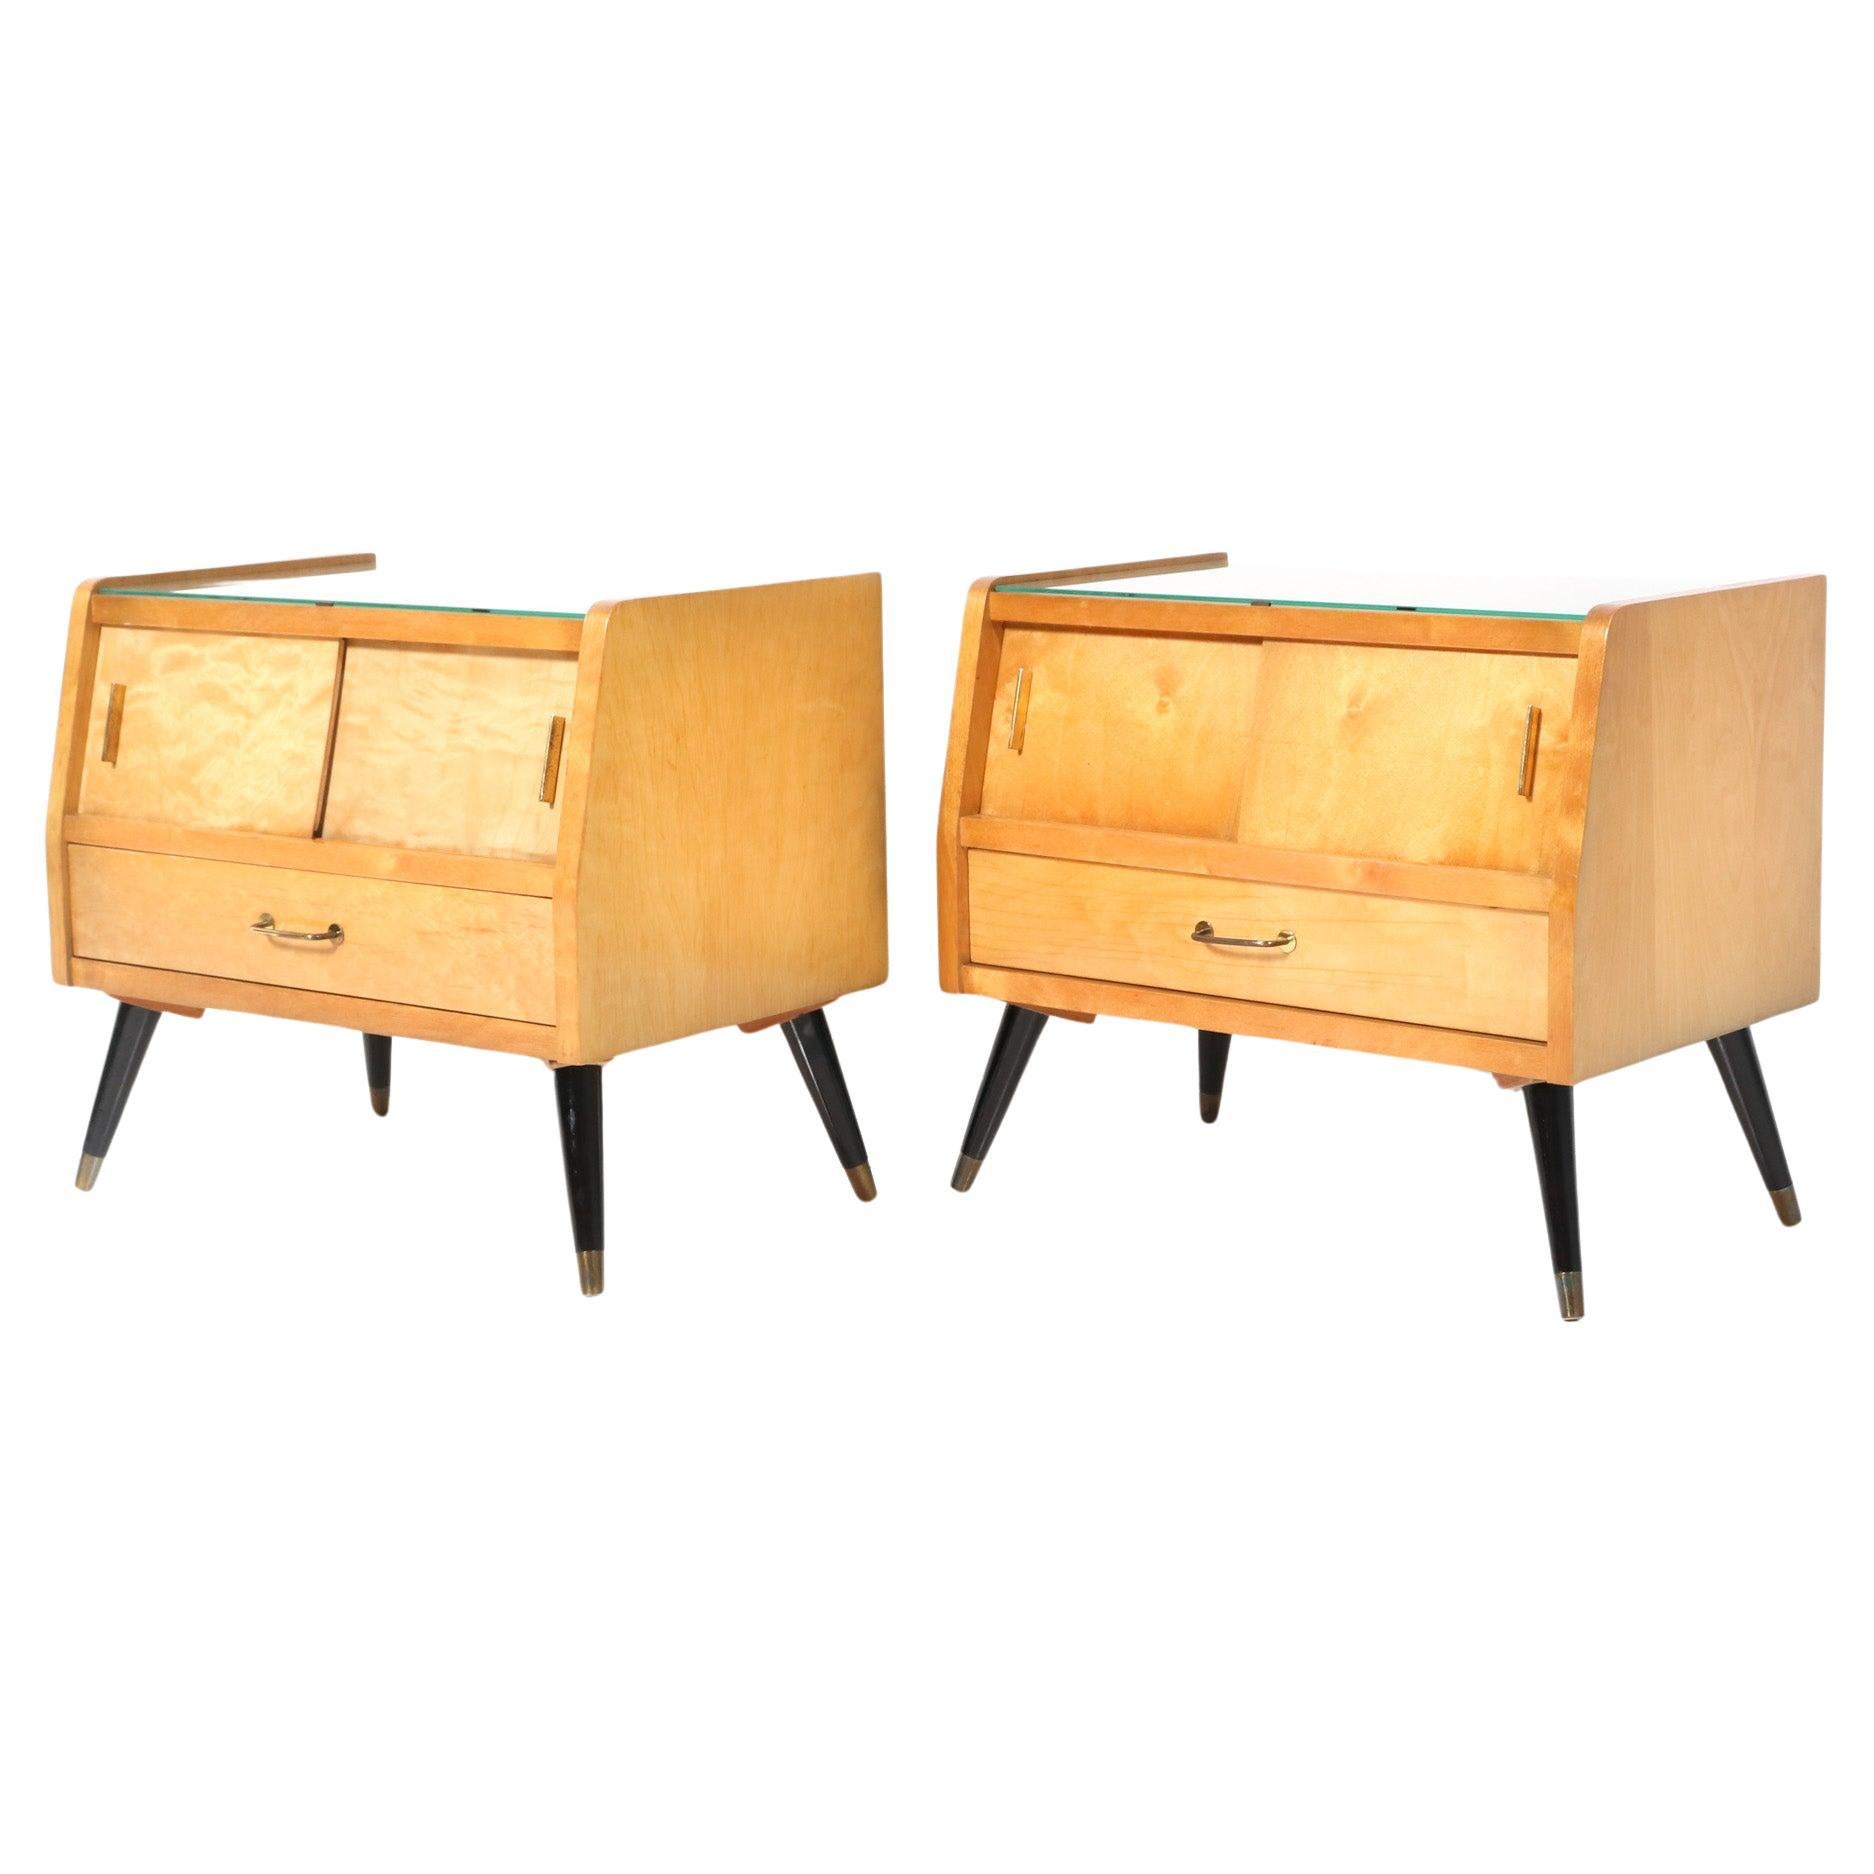  Mid-Century Modern Italian Nightstands or Bedside Tables, 1960s For Sale